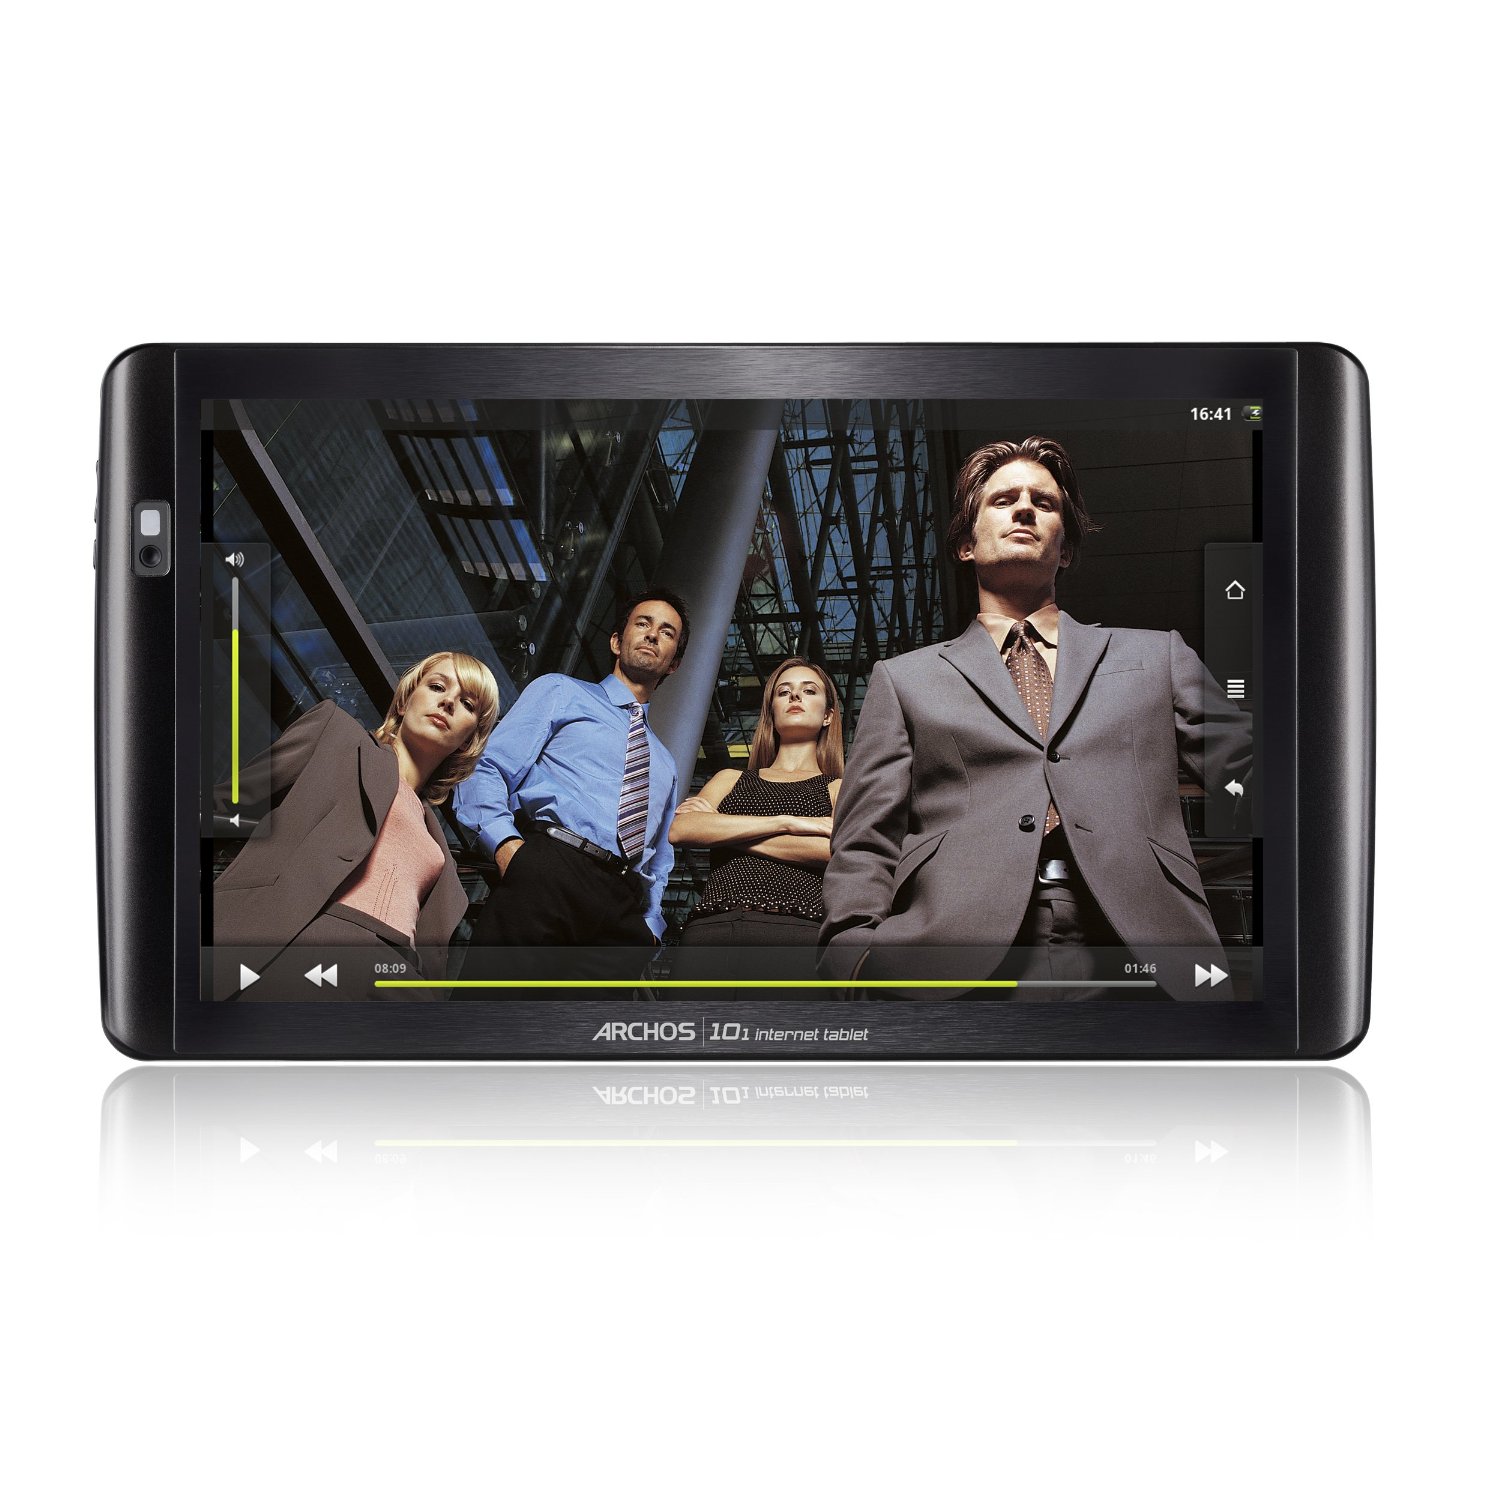 http://thetechjournal.com/wp-content/uploads/images/1110/1318017670-archos-101-android-powered-internet-tablet-5.jpg